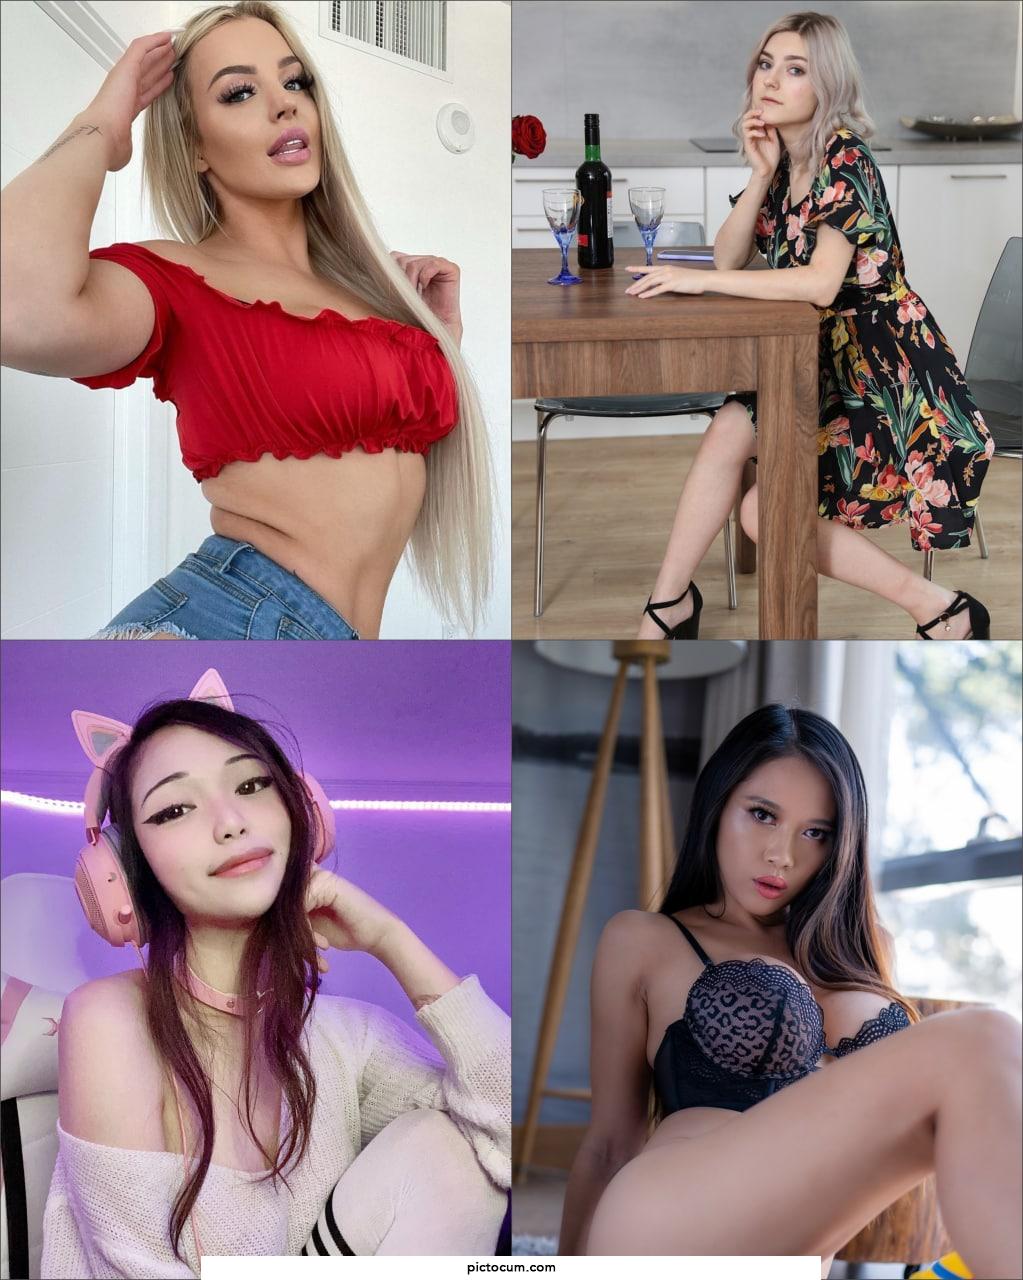 💋 55.34 GB 💋 Badgirlsarchive.site 🥵 6 IN 1 - OF Mega Pack- New Updated 💦 Mega Full C0llection 👇